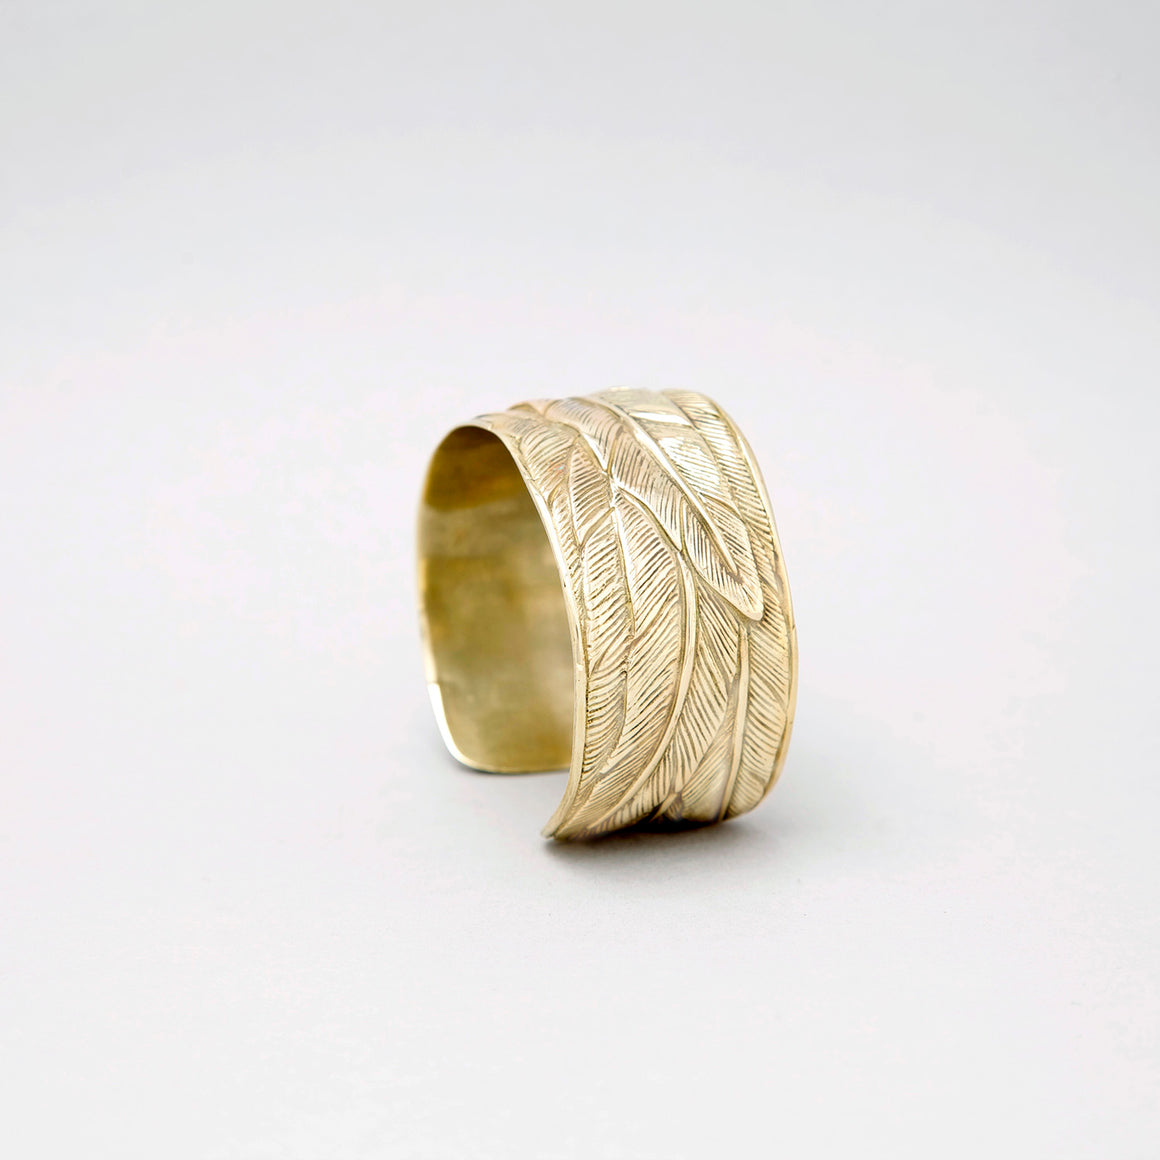 WIDE YELLOW BRASS FEATHER CUFF